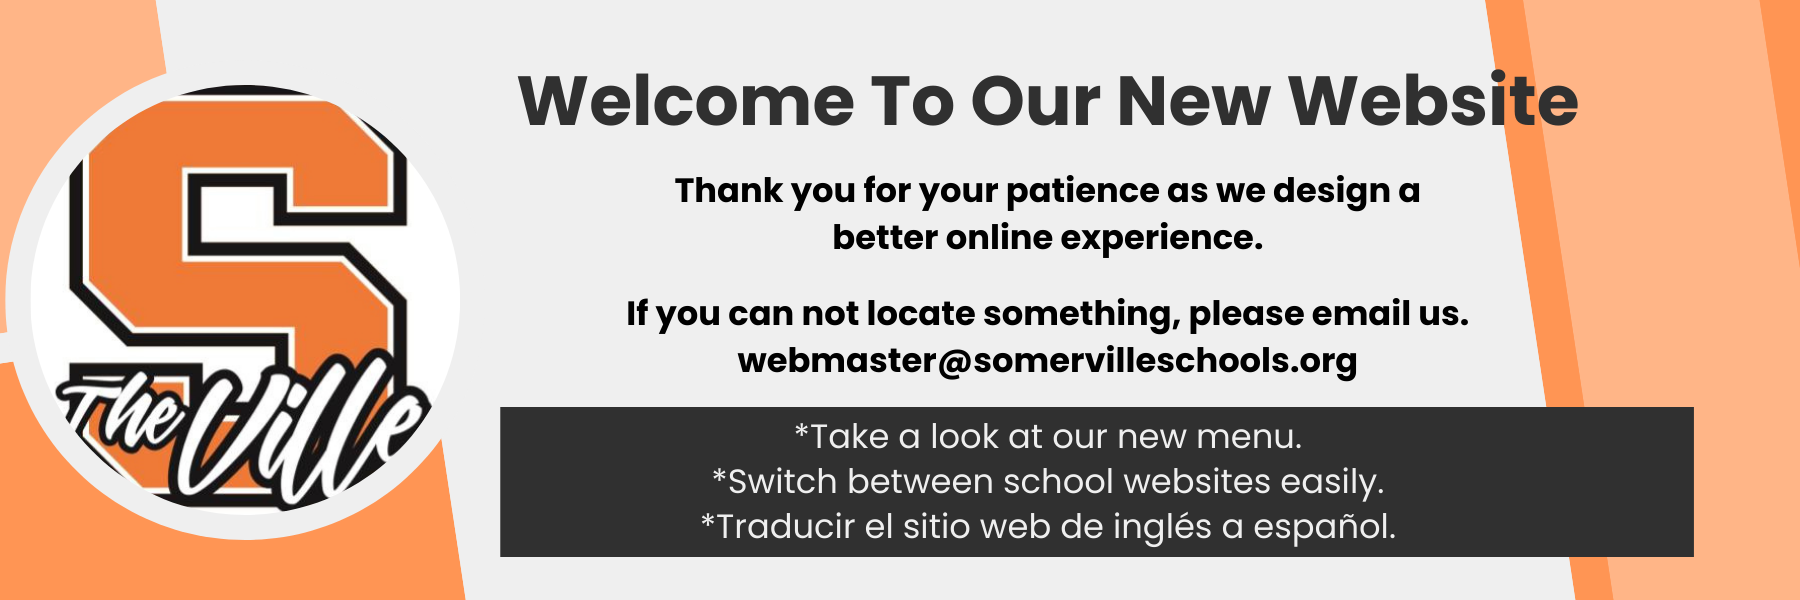 Thank you for your patience as we design a better online experience.  If you can not locate something, please email us. webmaster@somervilleschools.org